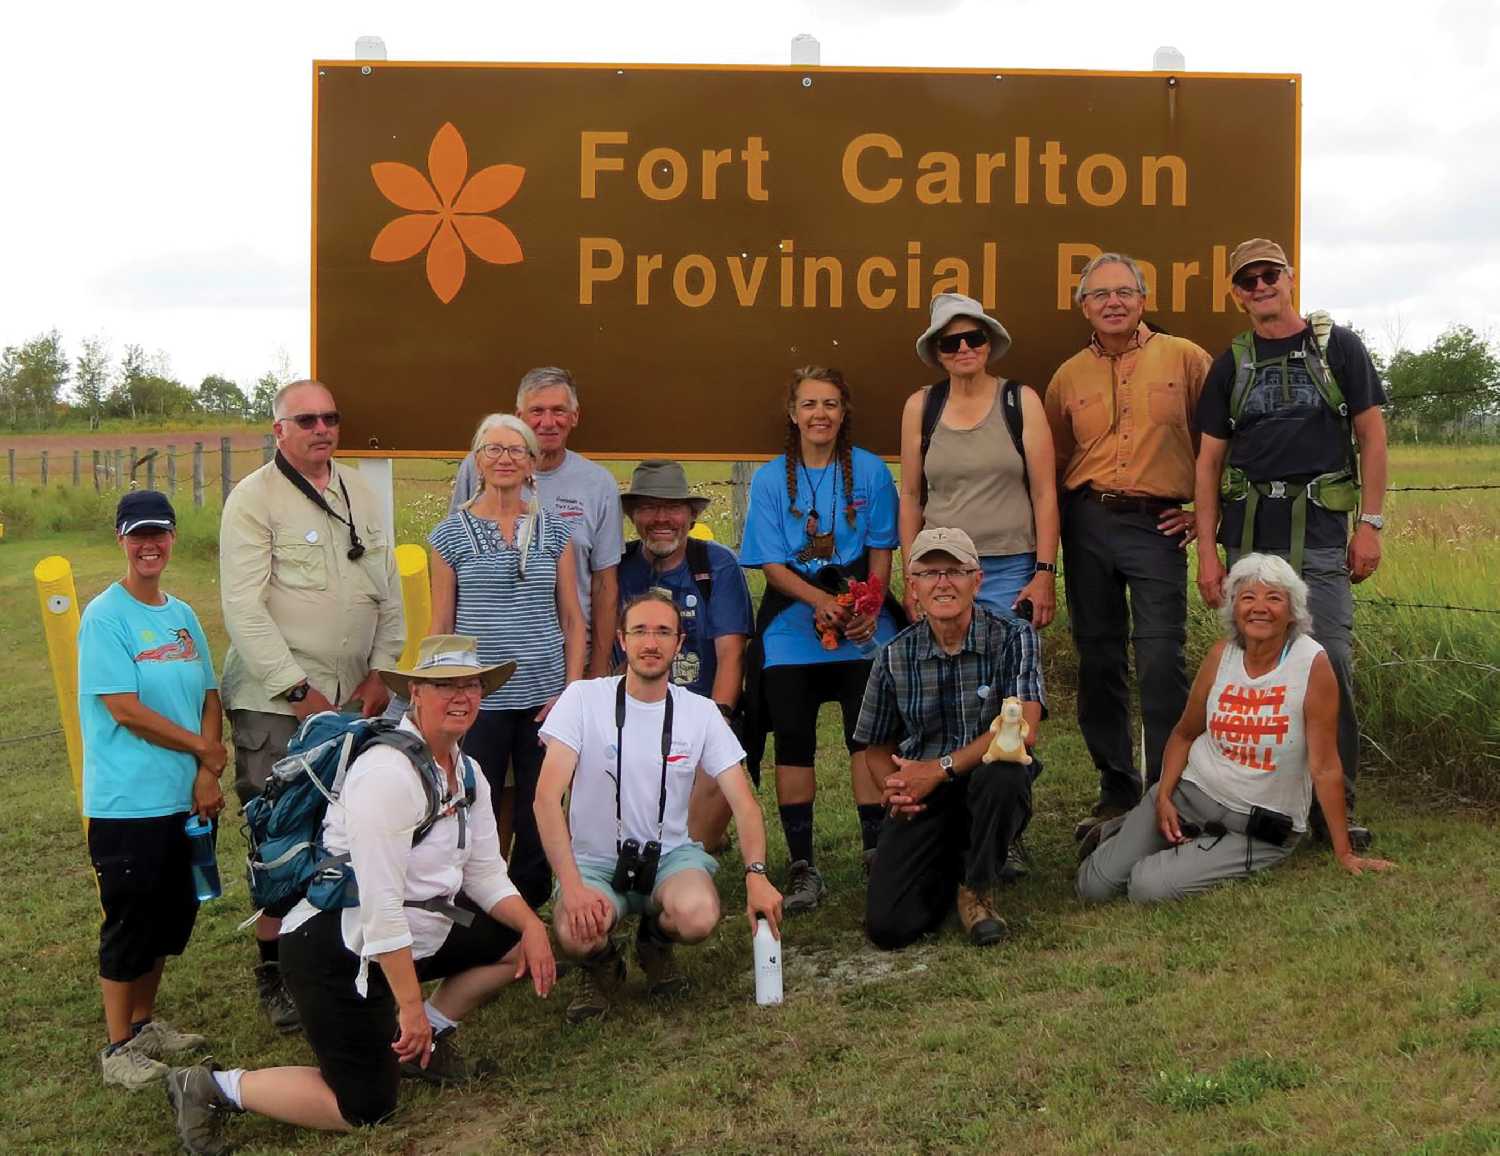 The Saskatchewan History and Folklore Society will be holding a historic walk from August 10 to August 20 starting at Fort Ellice and ending at Fort QuAppelle